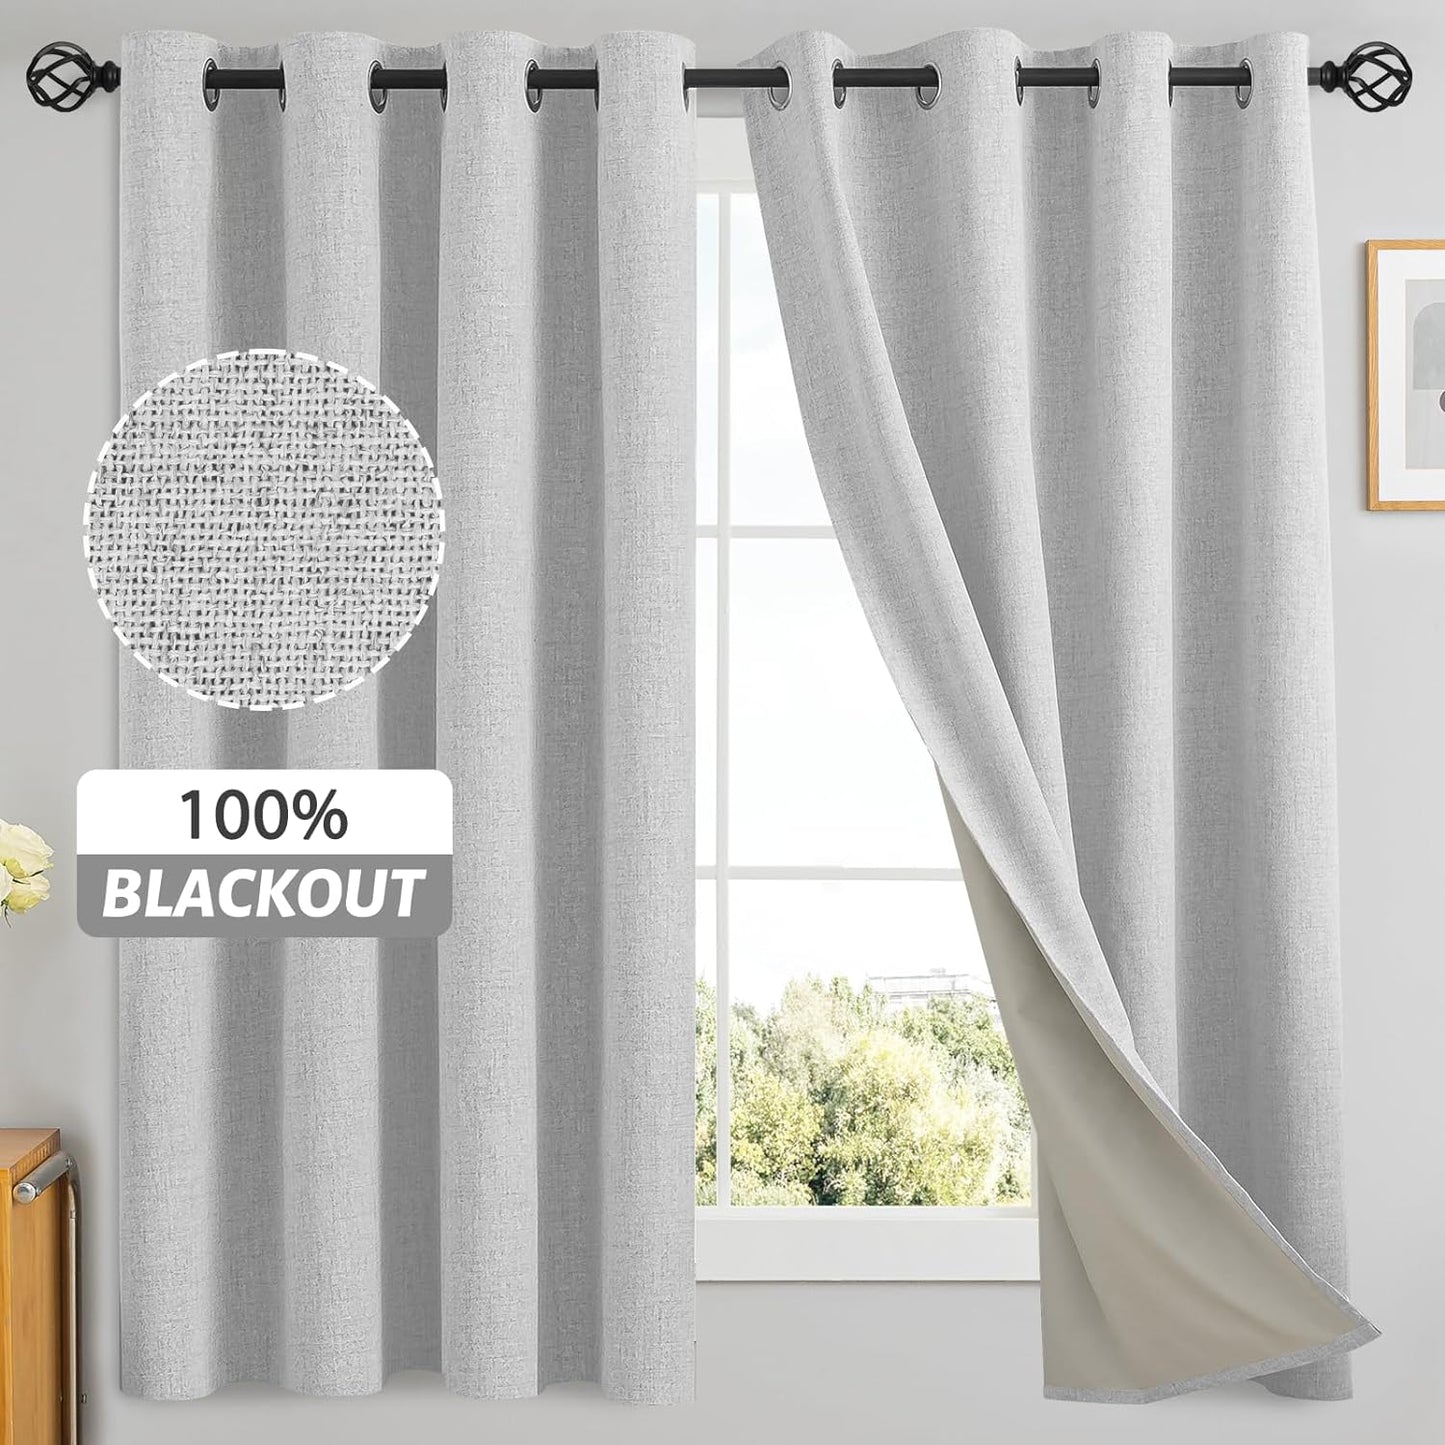 Yakamok Natural Linen Curtains 100% Blackout 84 Inches Long,Room Darkening Textured Curtains for Living Room Thermal Grommet Bedroom Curtains 2 Panels with Greyish White Liner  Yakamok White 52W X 63L / 2 Panels 